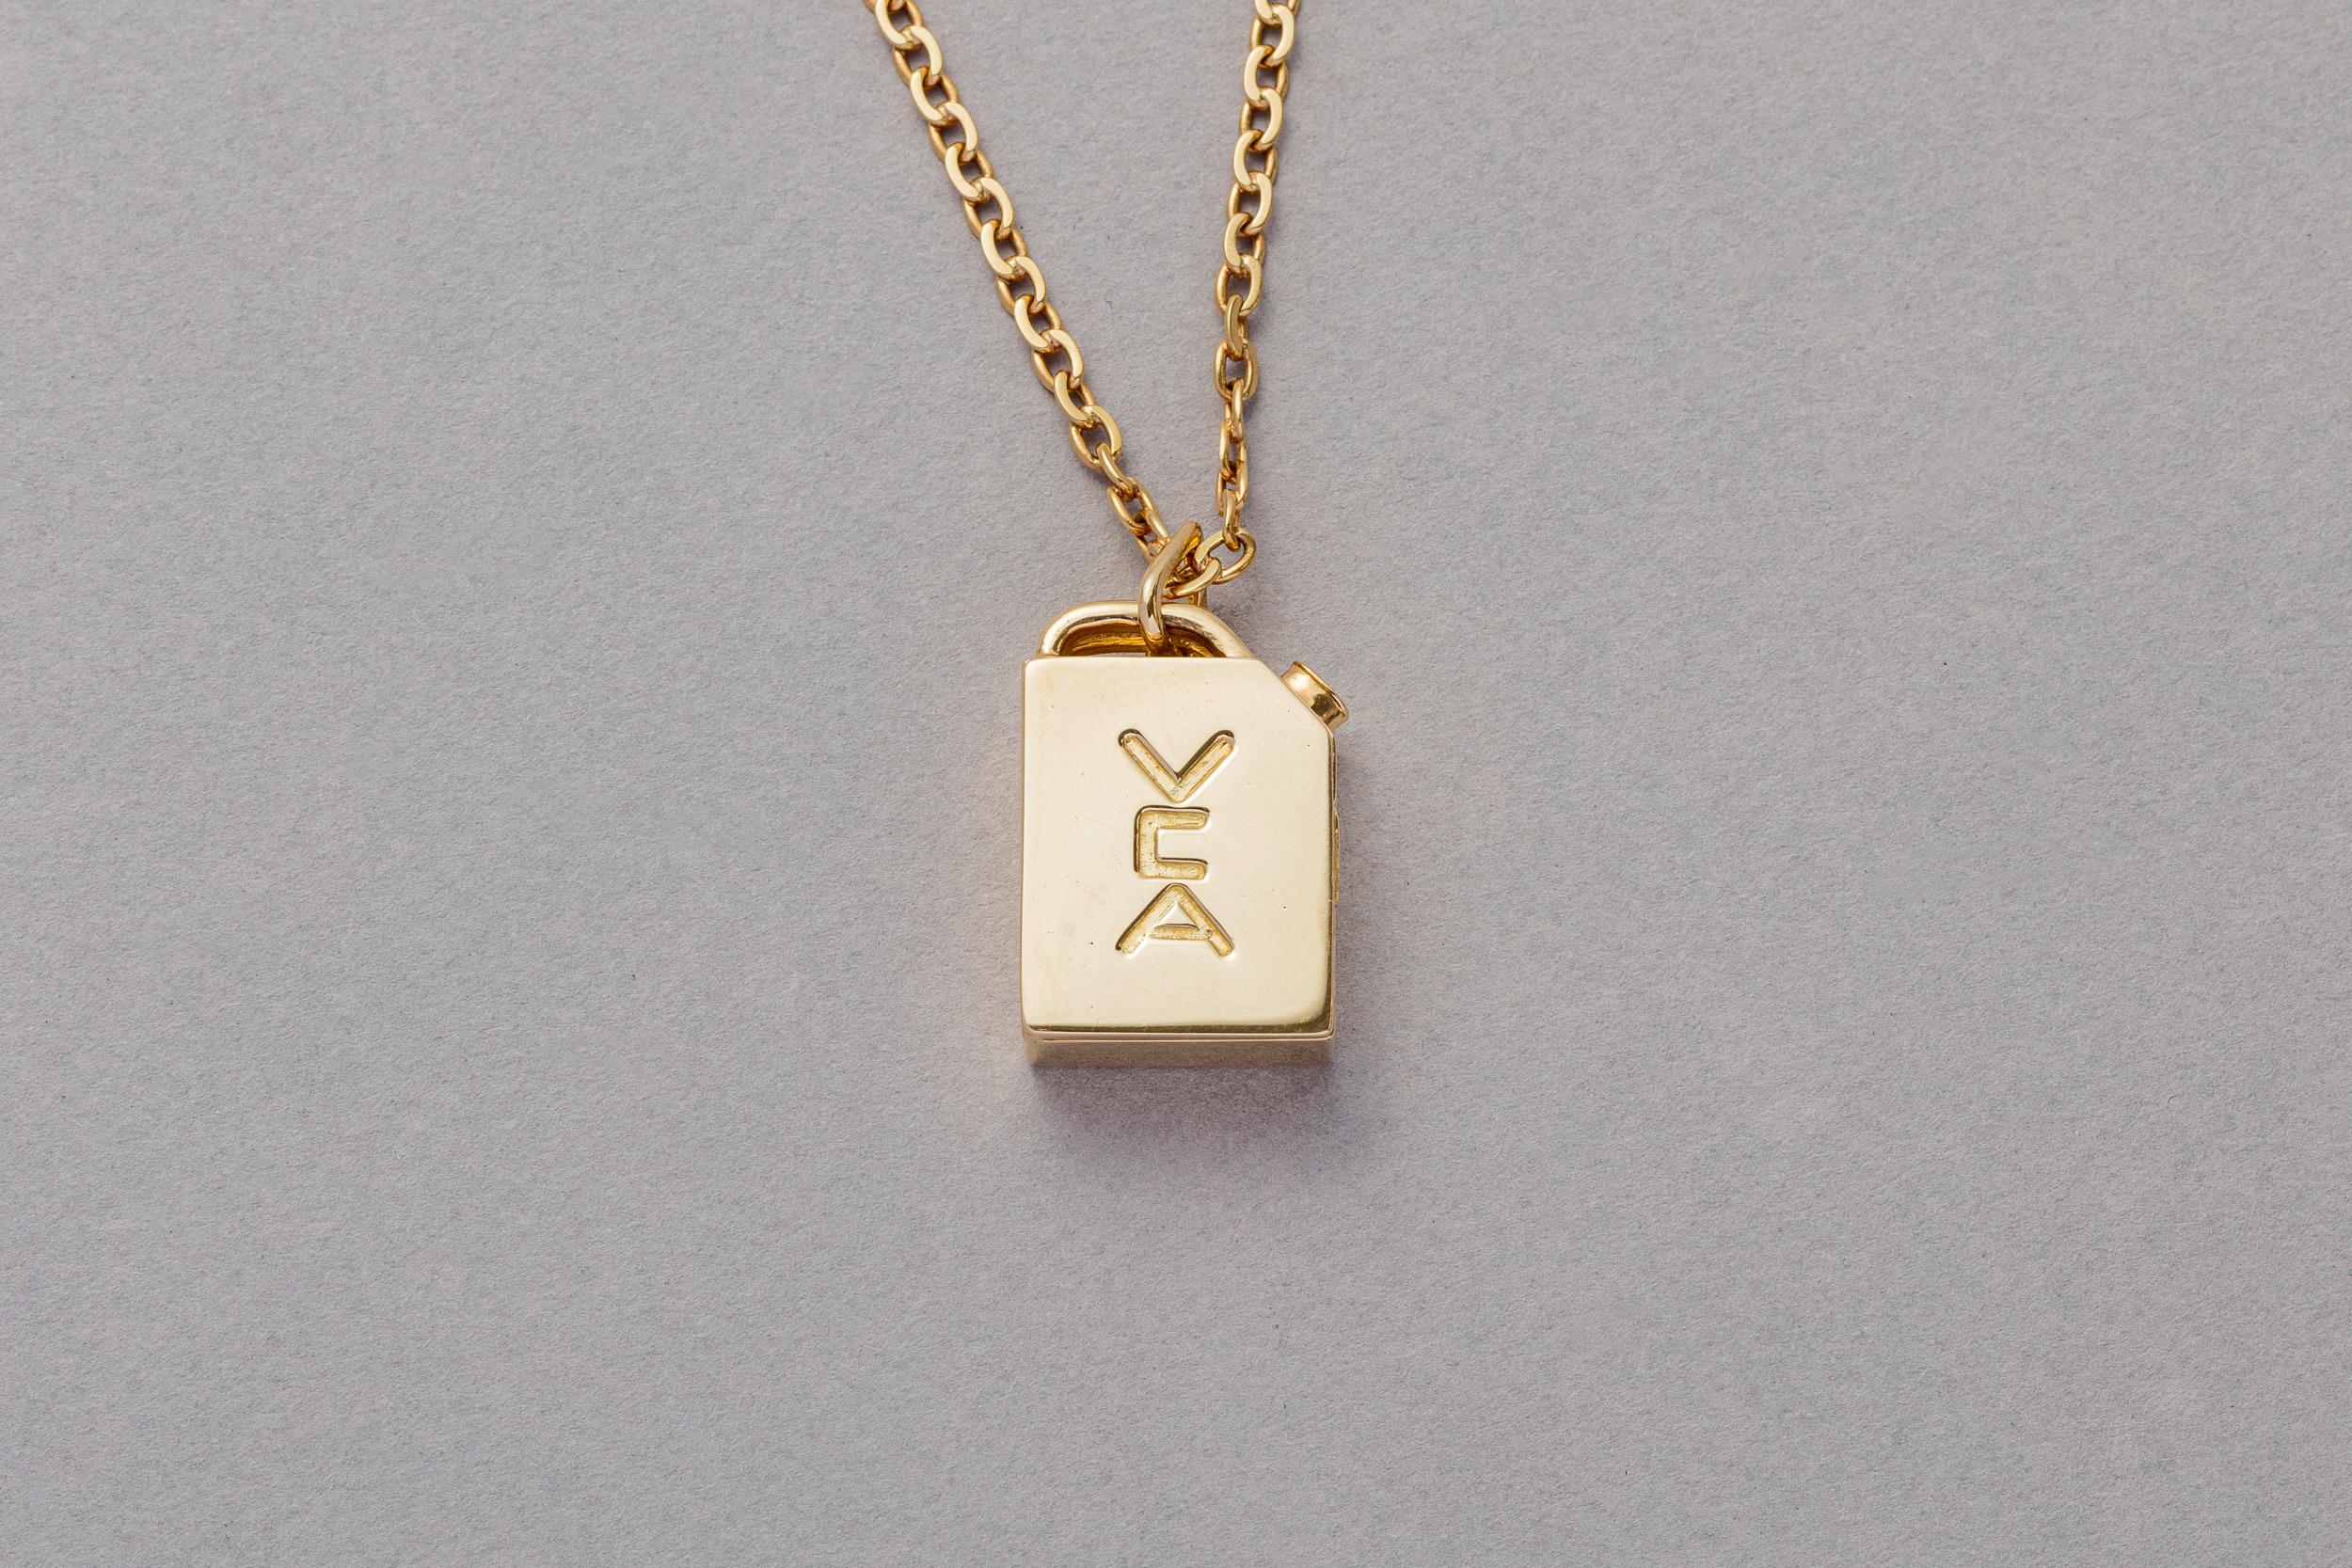 An 18 carat gold vintage gas tank locket pendant by Péry Fils for Van Cleef and Arpels, signed, dated and numbered: Van Cleef & Arpels, on a Van Cleef & Arpels chain, 1976.  Relevant in the 1970s because just as now there was an energy crisis. Van